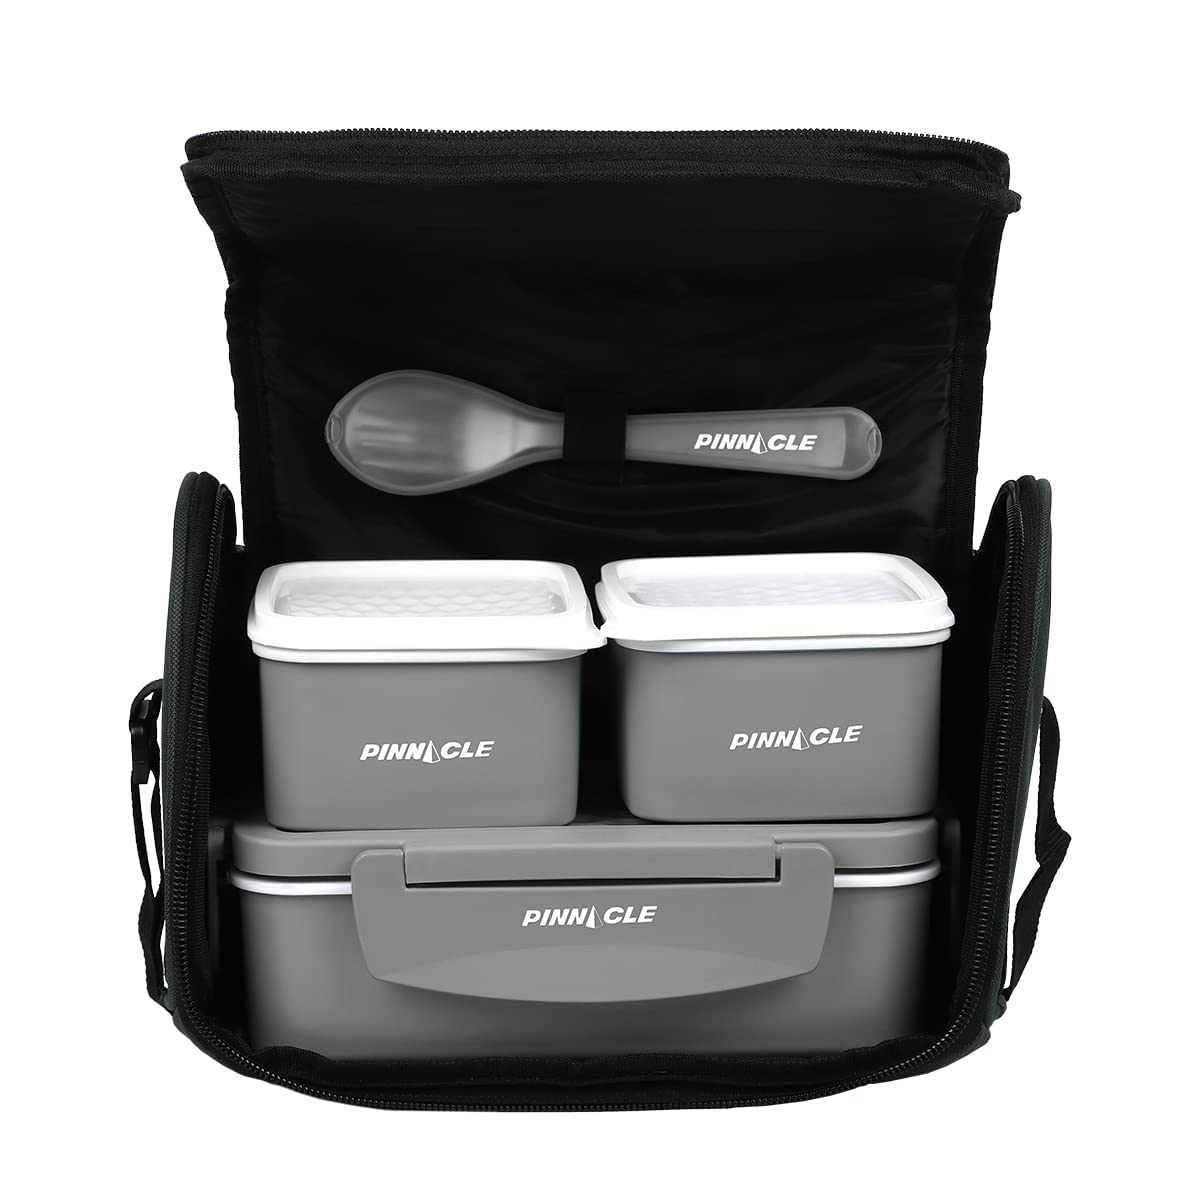 Pinnacle Prata Stainless Steel Lunch Box Kit with Insulated Bag | Lunch Box for Kids & Office Women | Lunch Box for School | Spoon & Fork Set | Leak Proof Lunch Box | 1250ml (Grey)